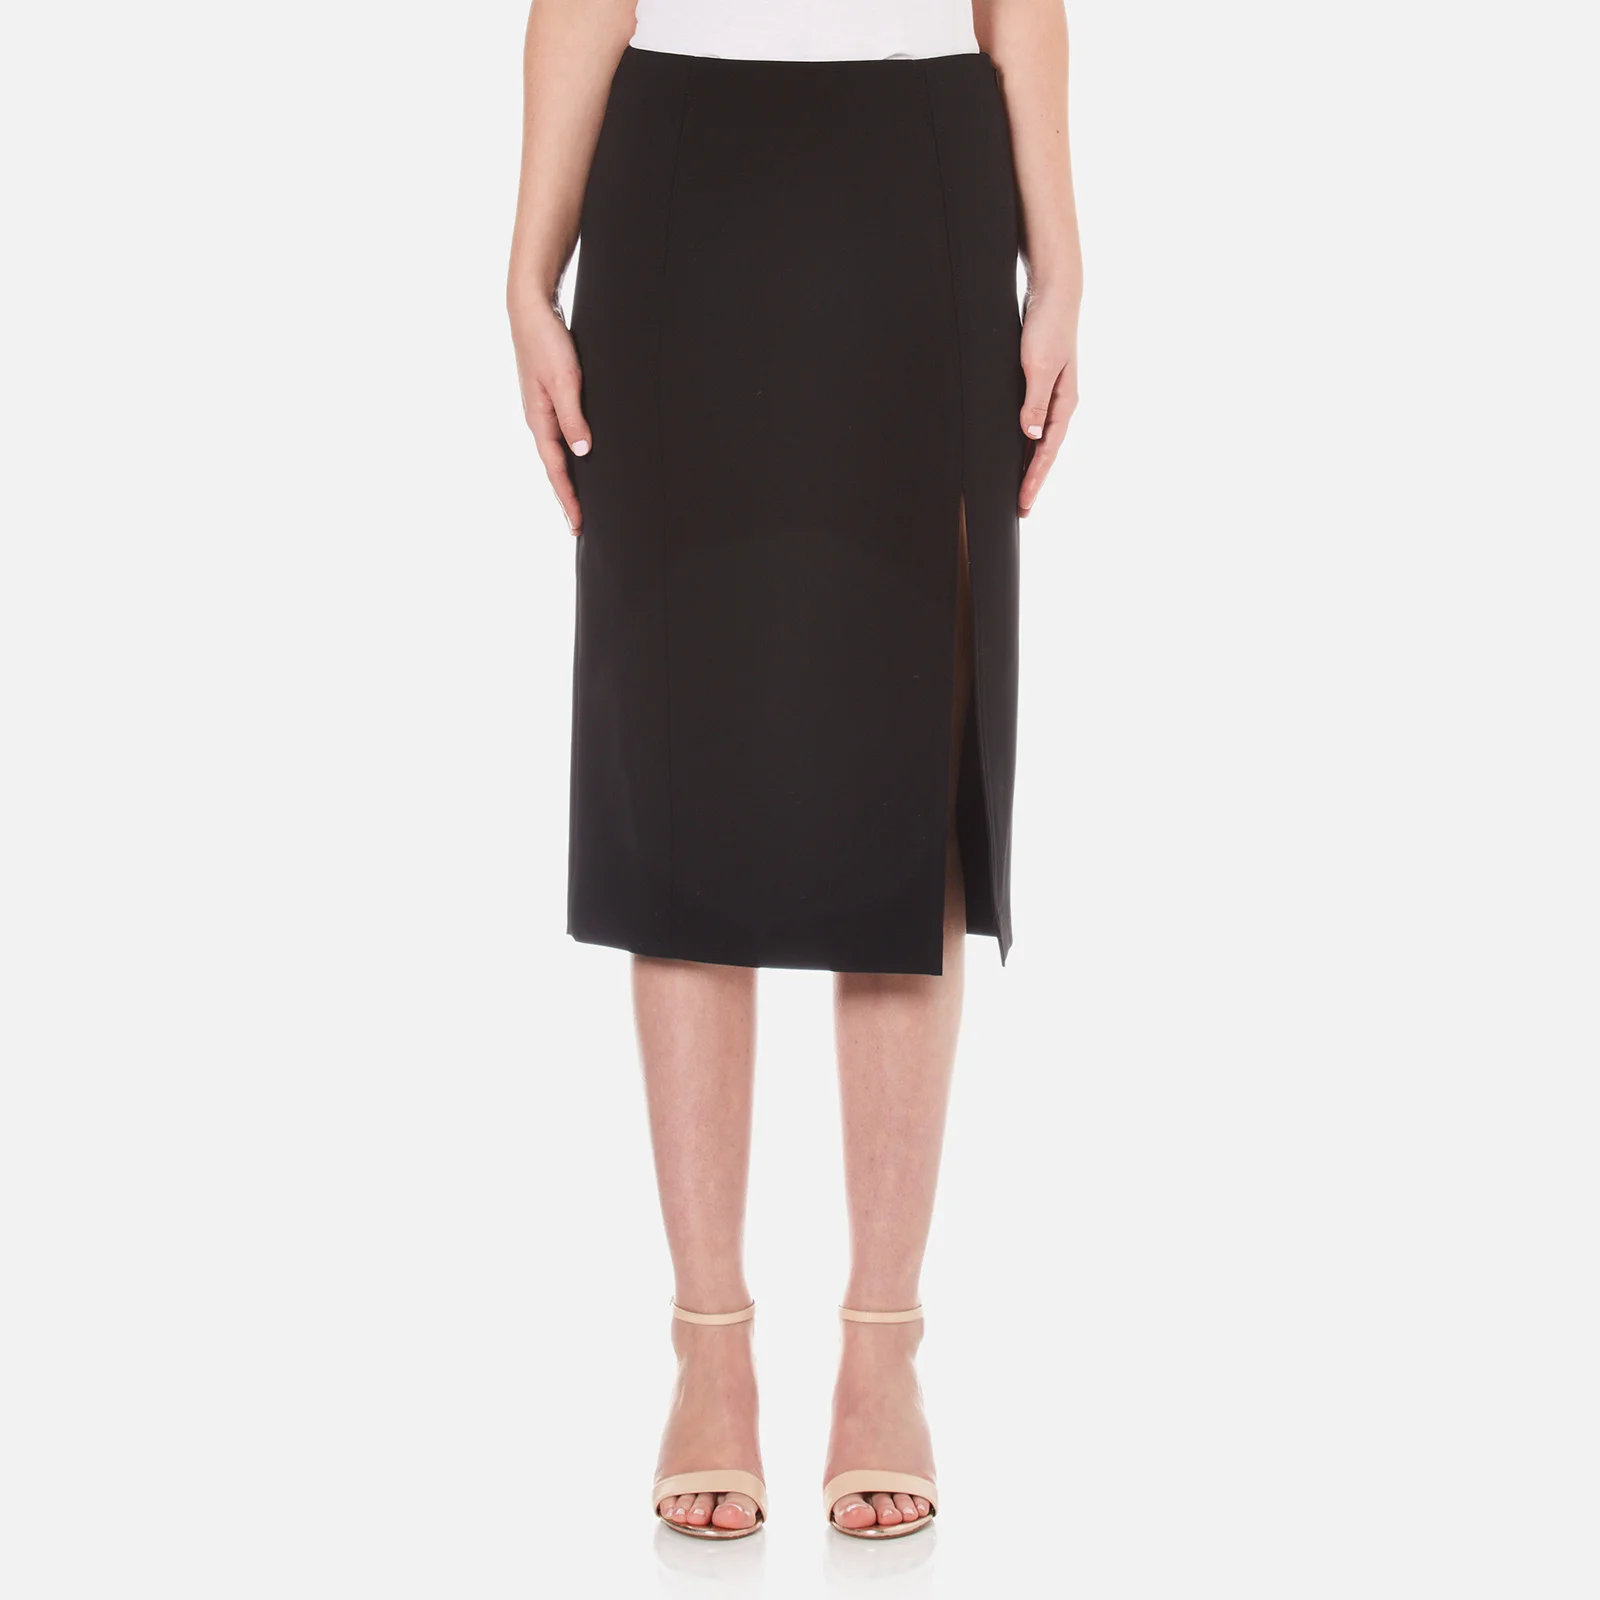 T by Alexander Wang Women's Stretch Poly Twill Slick Pencil Skirt with Slit - Black Image 1